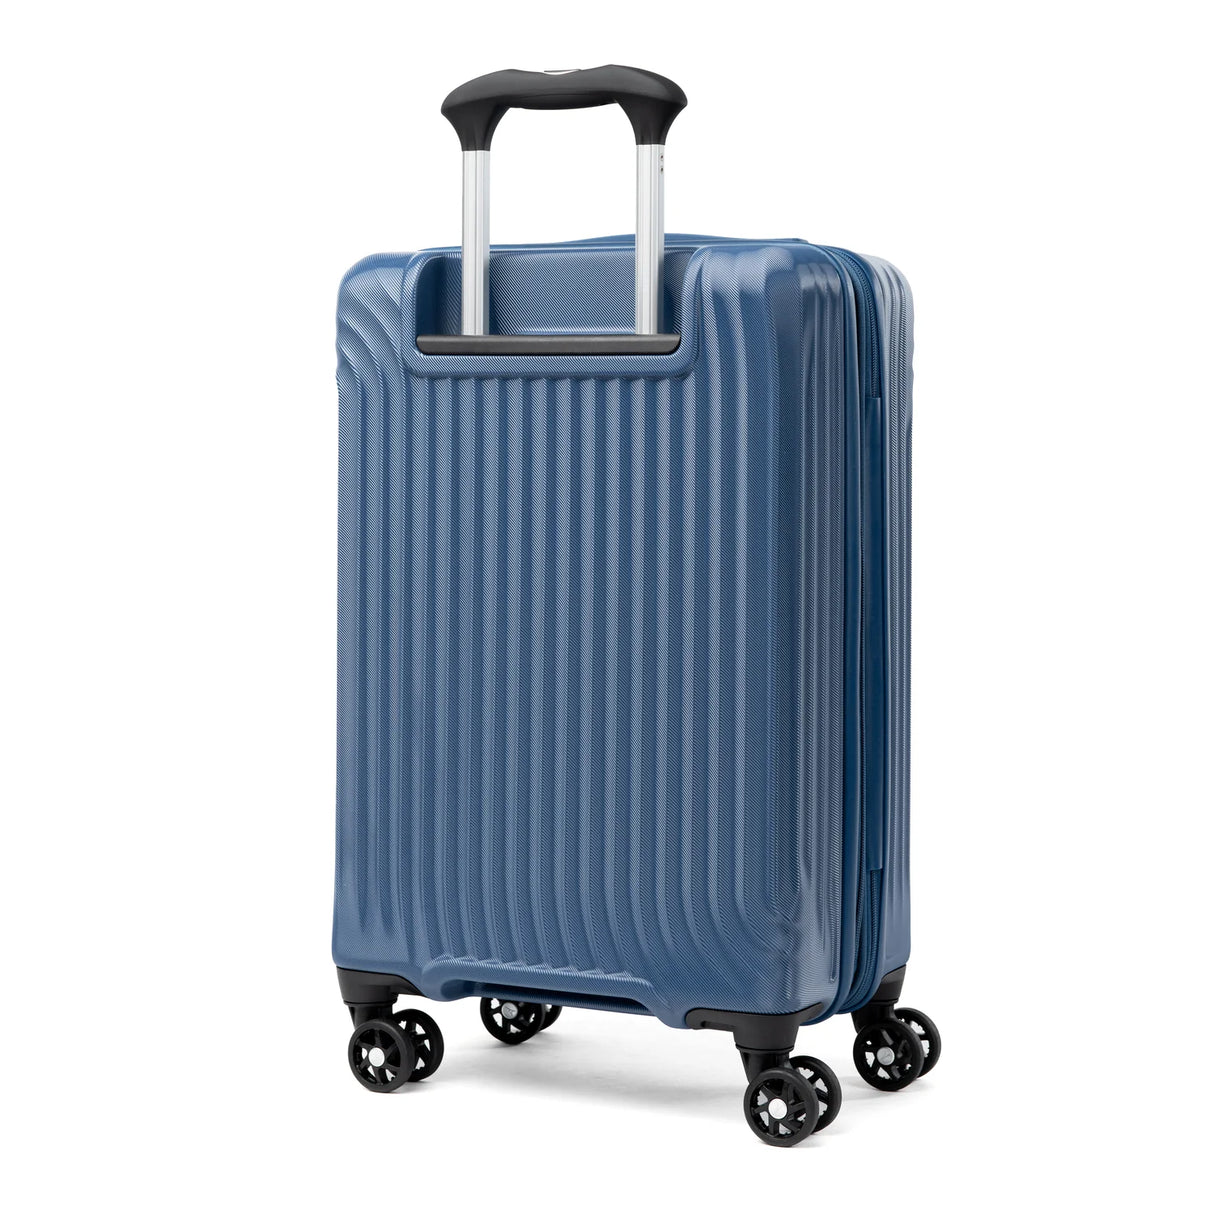 Travelpro Maxlite Air Carry-On Expandable Hardside Spinner , , 401229147_back-1500x1500-d707c29_1024x1024_2x_11919293-15f4-4729-a2cb-7faf8aca24e1